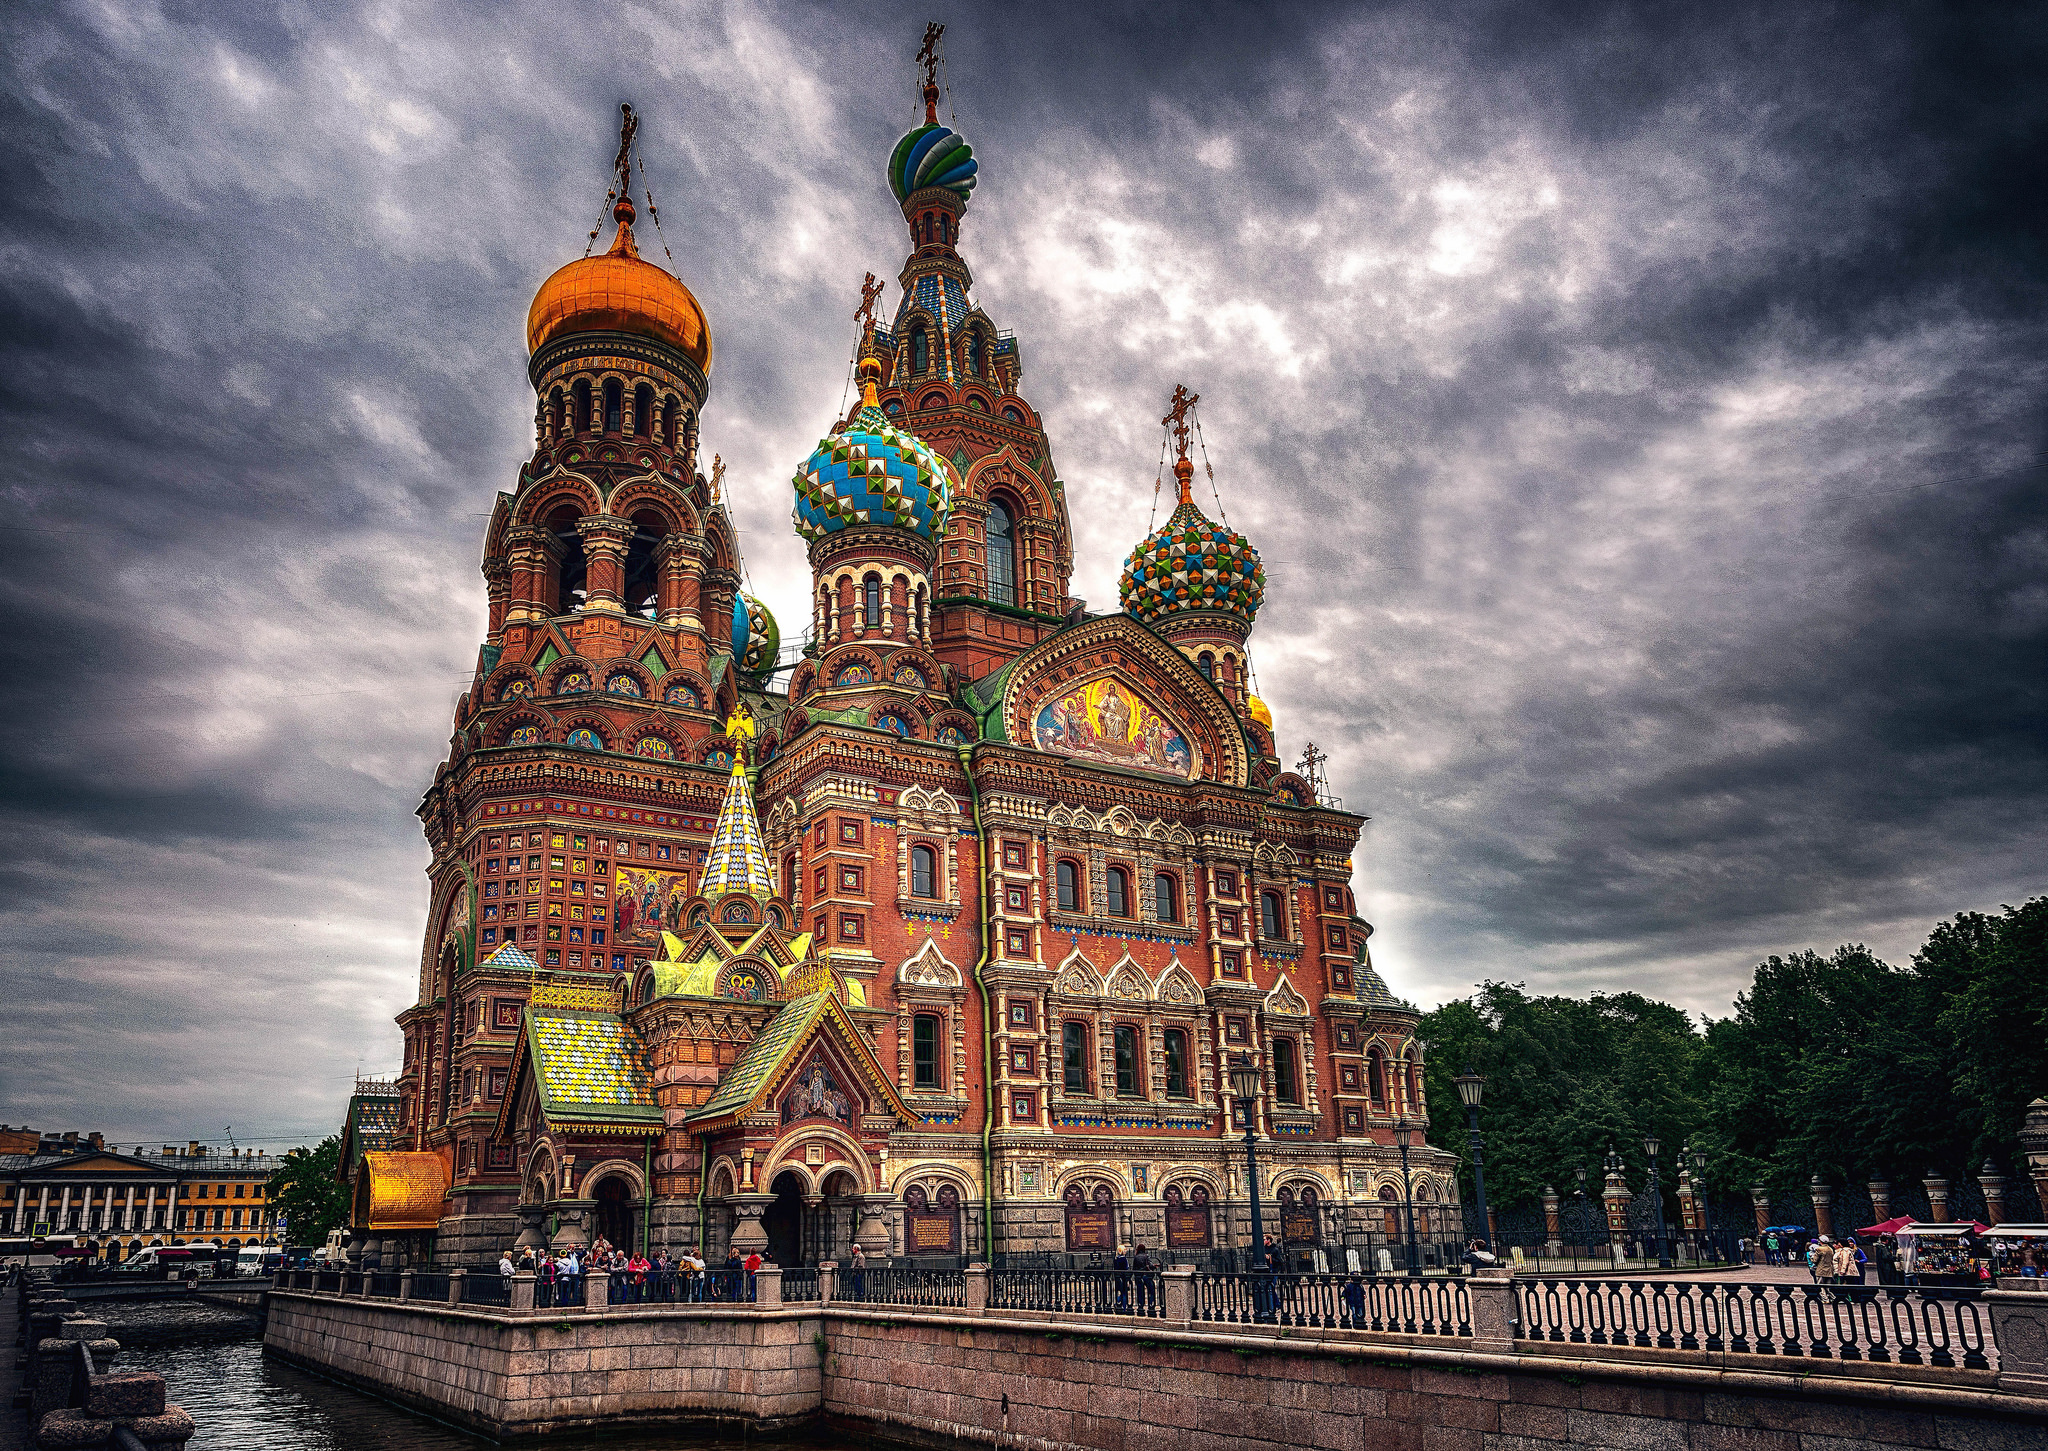 Church of the Savior on Spilled Blood in Russia by Massimo Cuomo